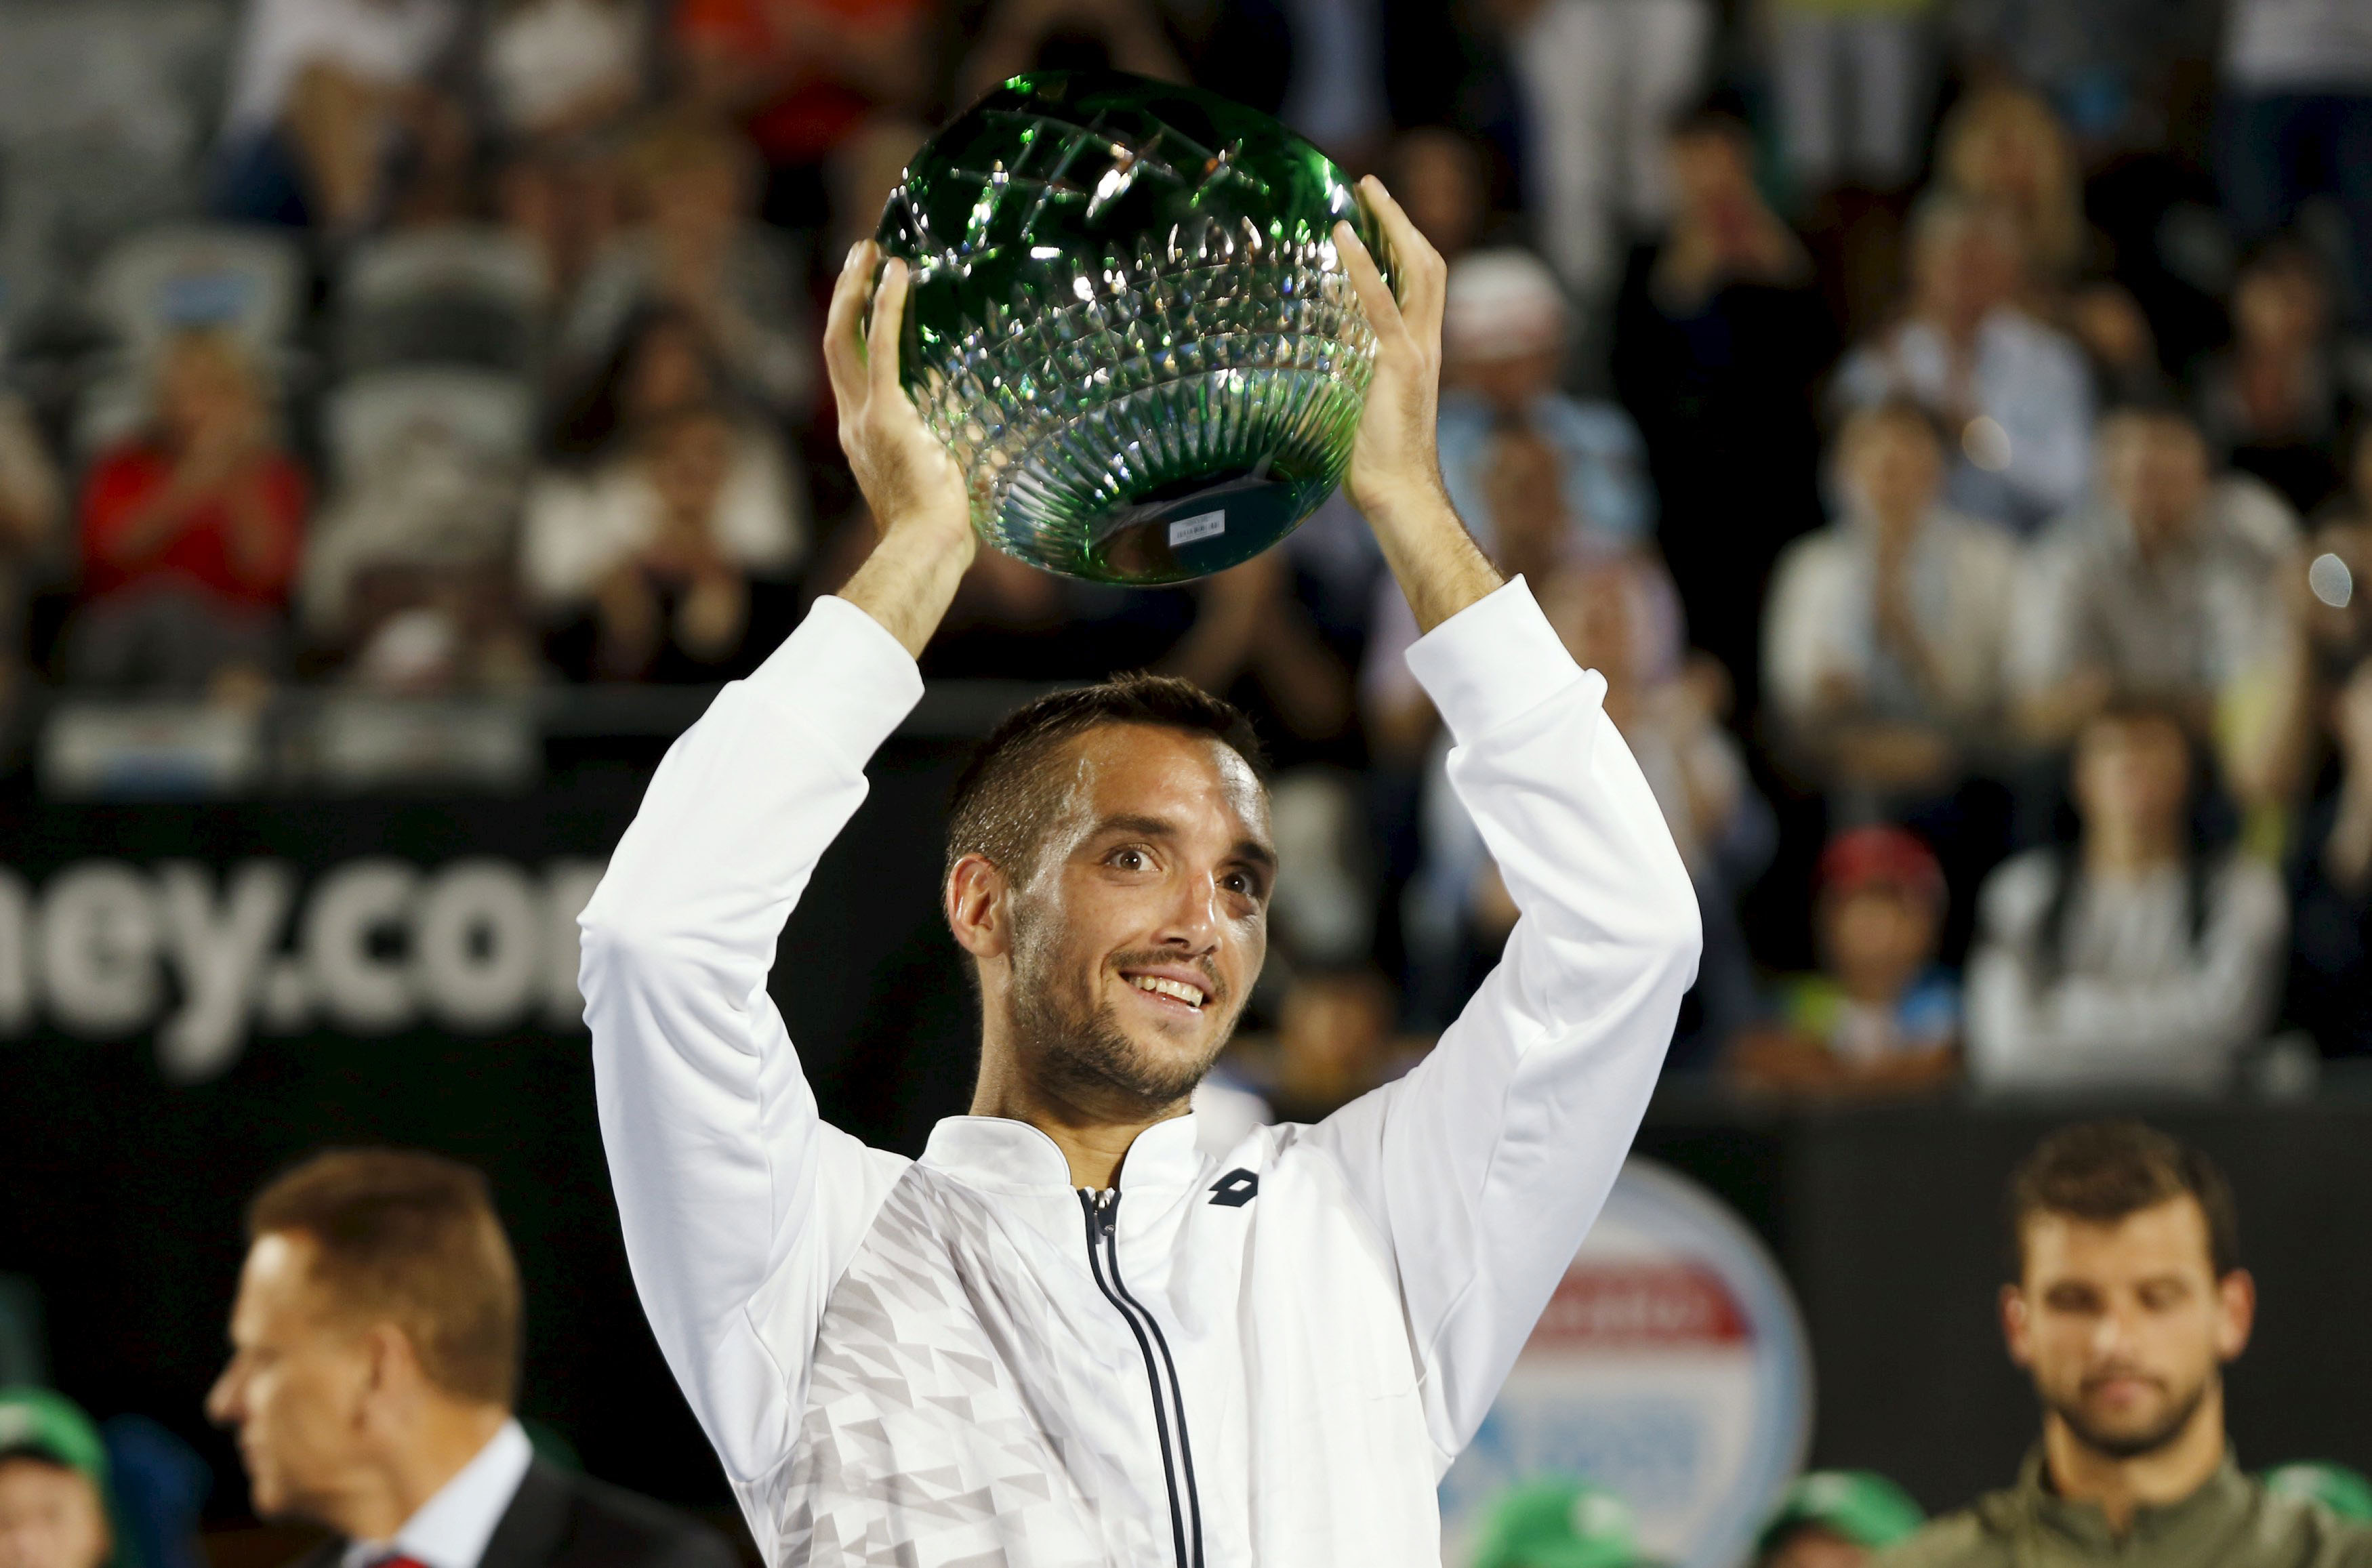 Viktor Troicki of Serbia holds the trophy after winning the Sydney International on Saturday. Photo: Reuters